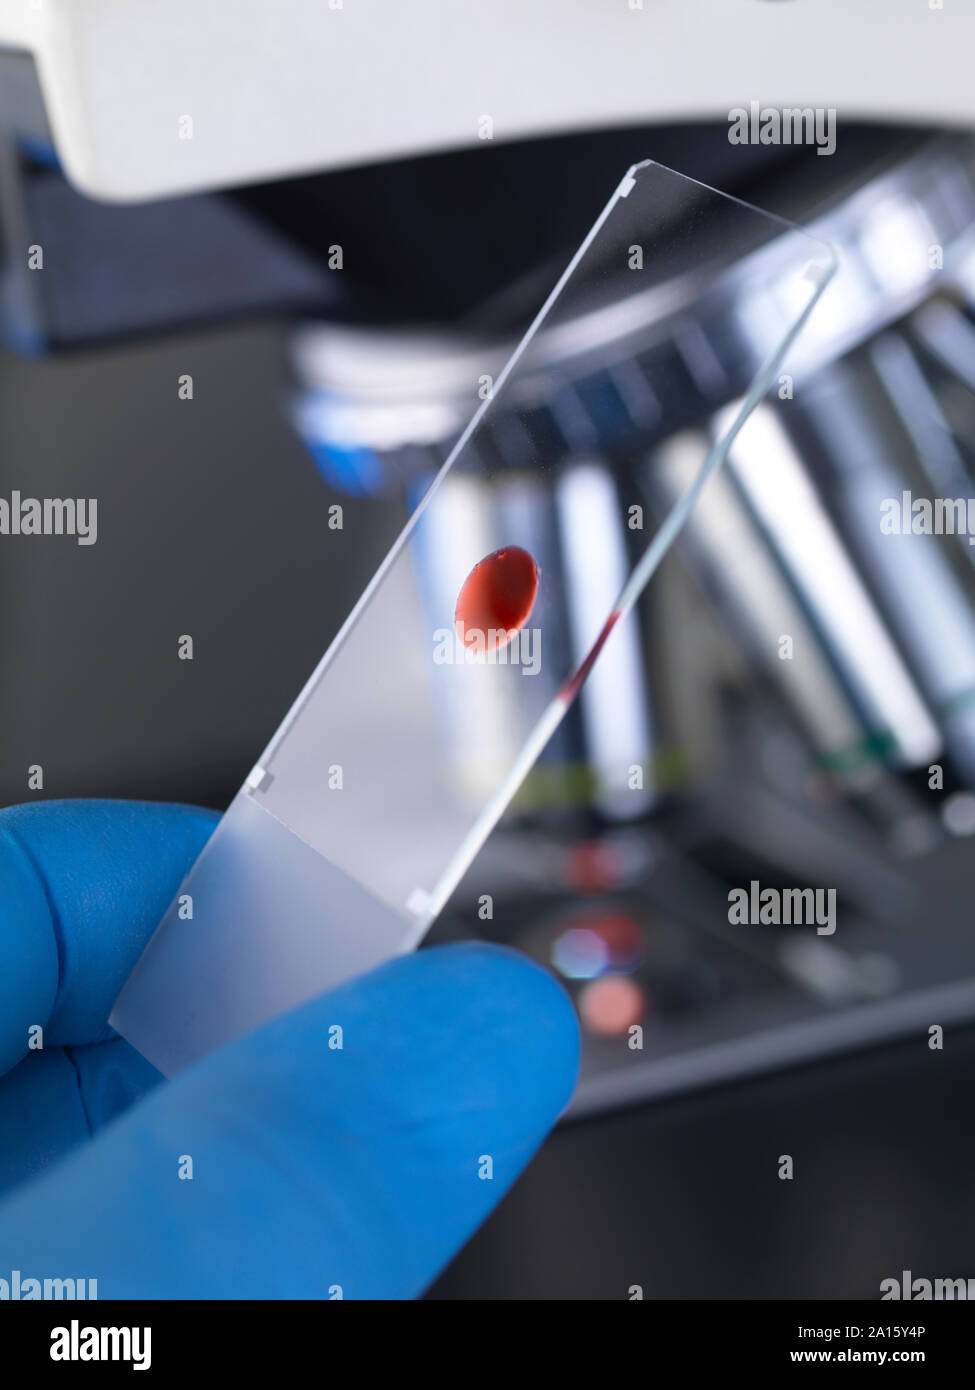 Scientist examining a glass slide containing a human sample under a microscope Stock Photo